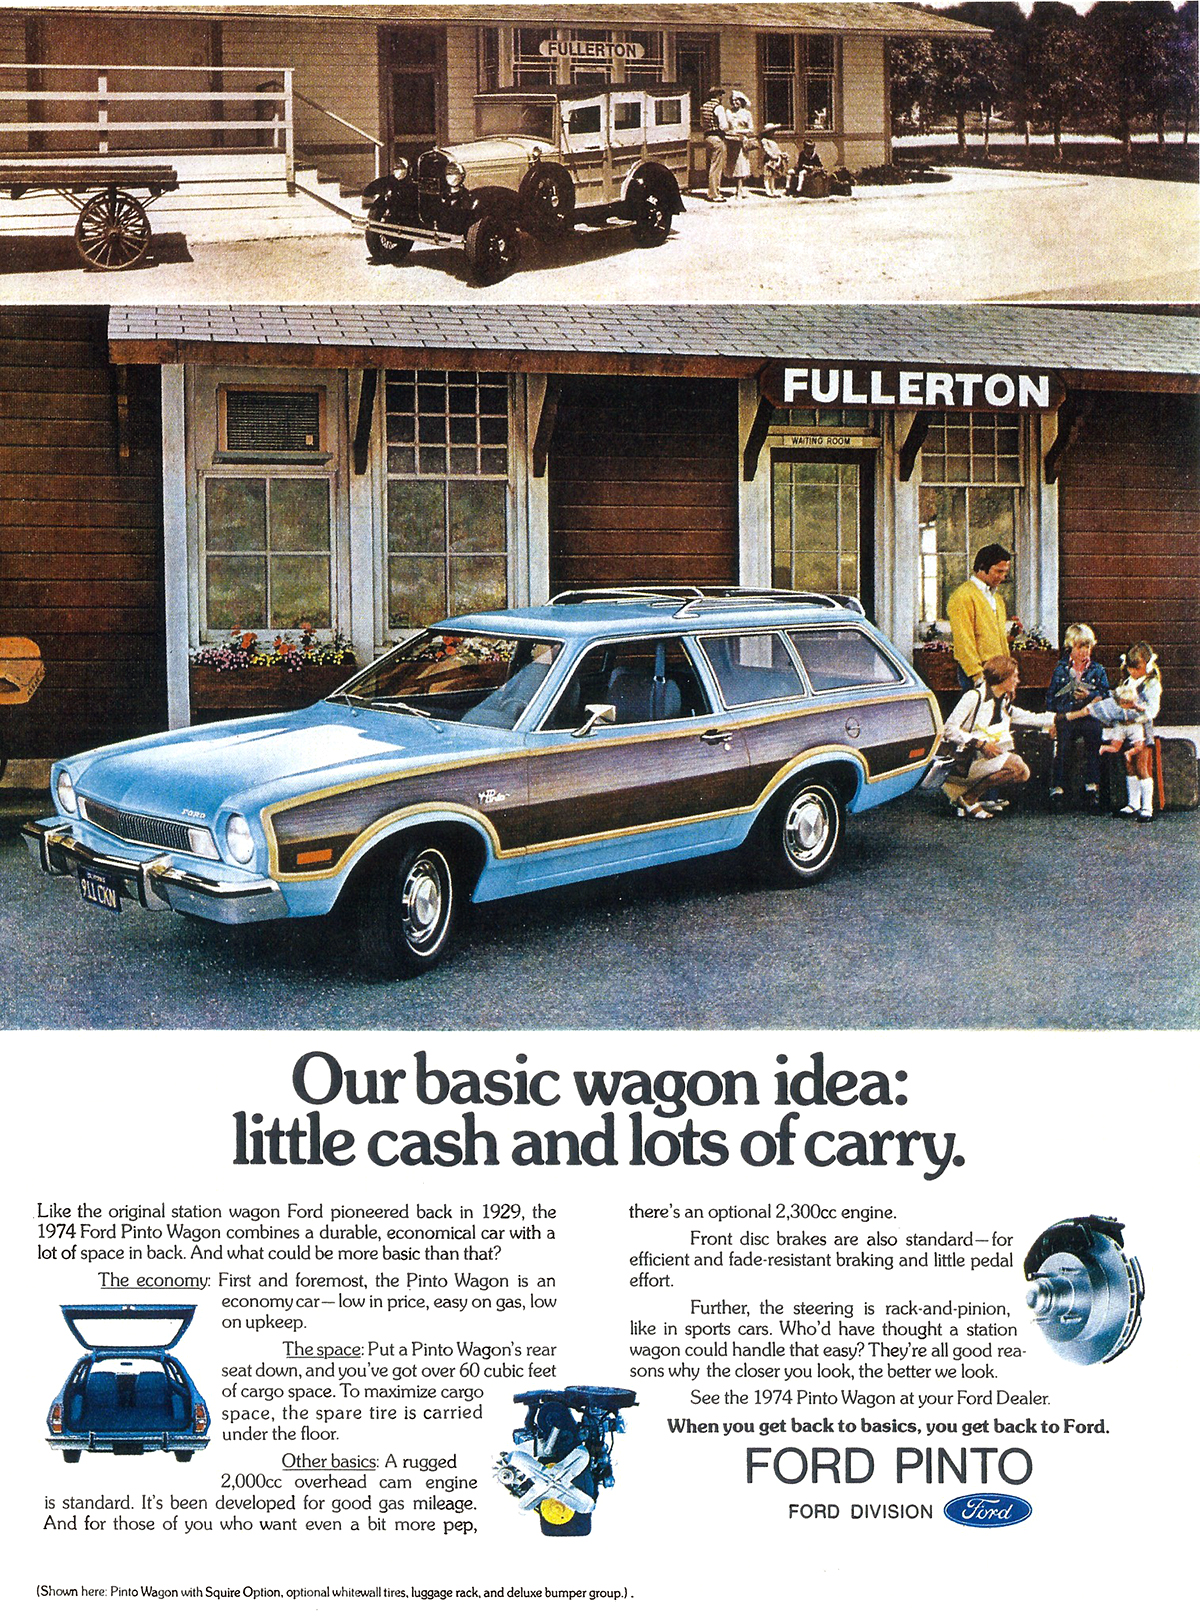 Ford Pinto Wagon with Squire Option Ad (1973–1974) - Our basic wagon idea: ...